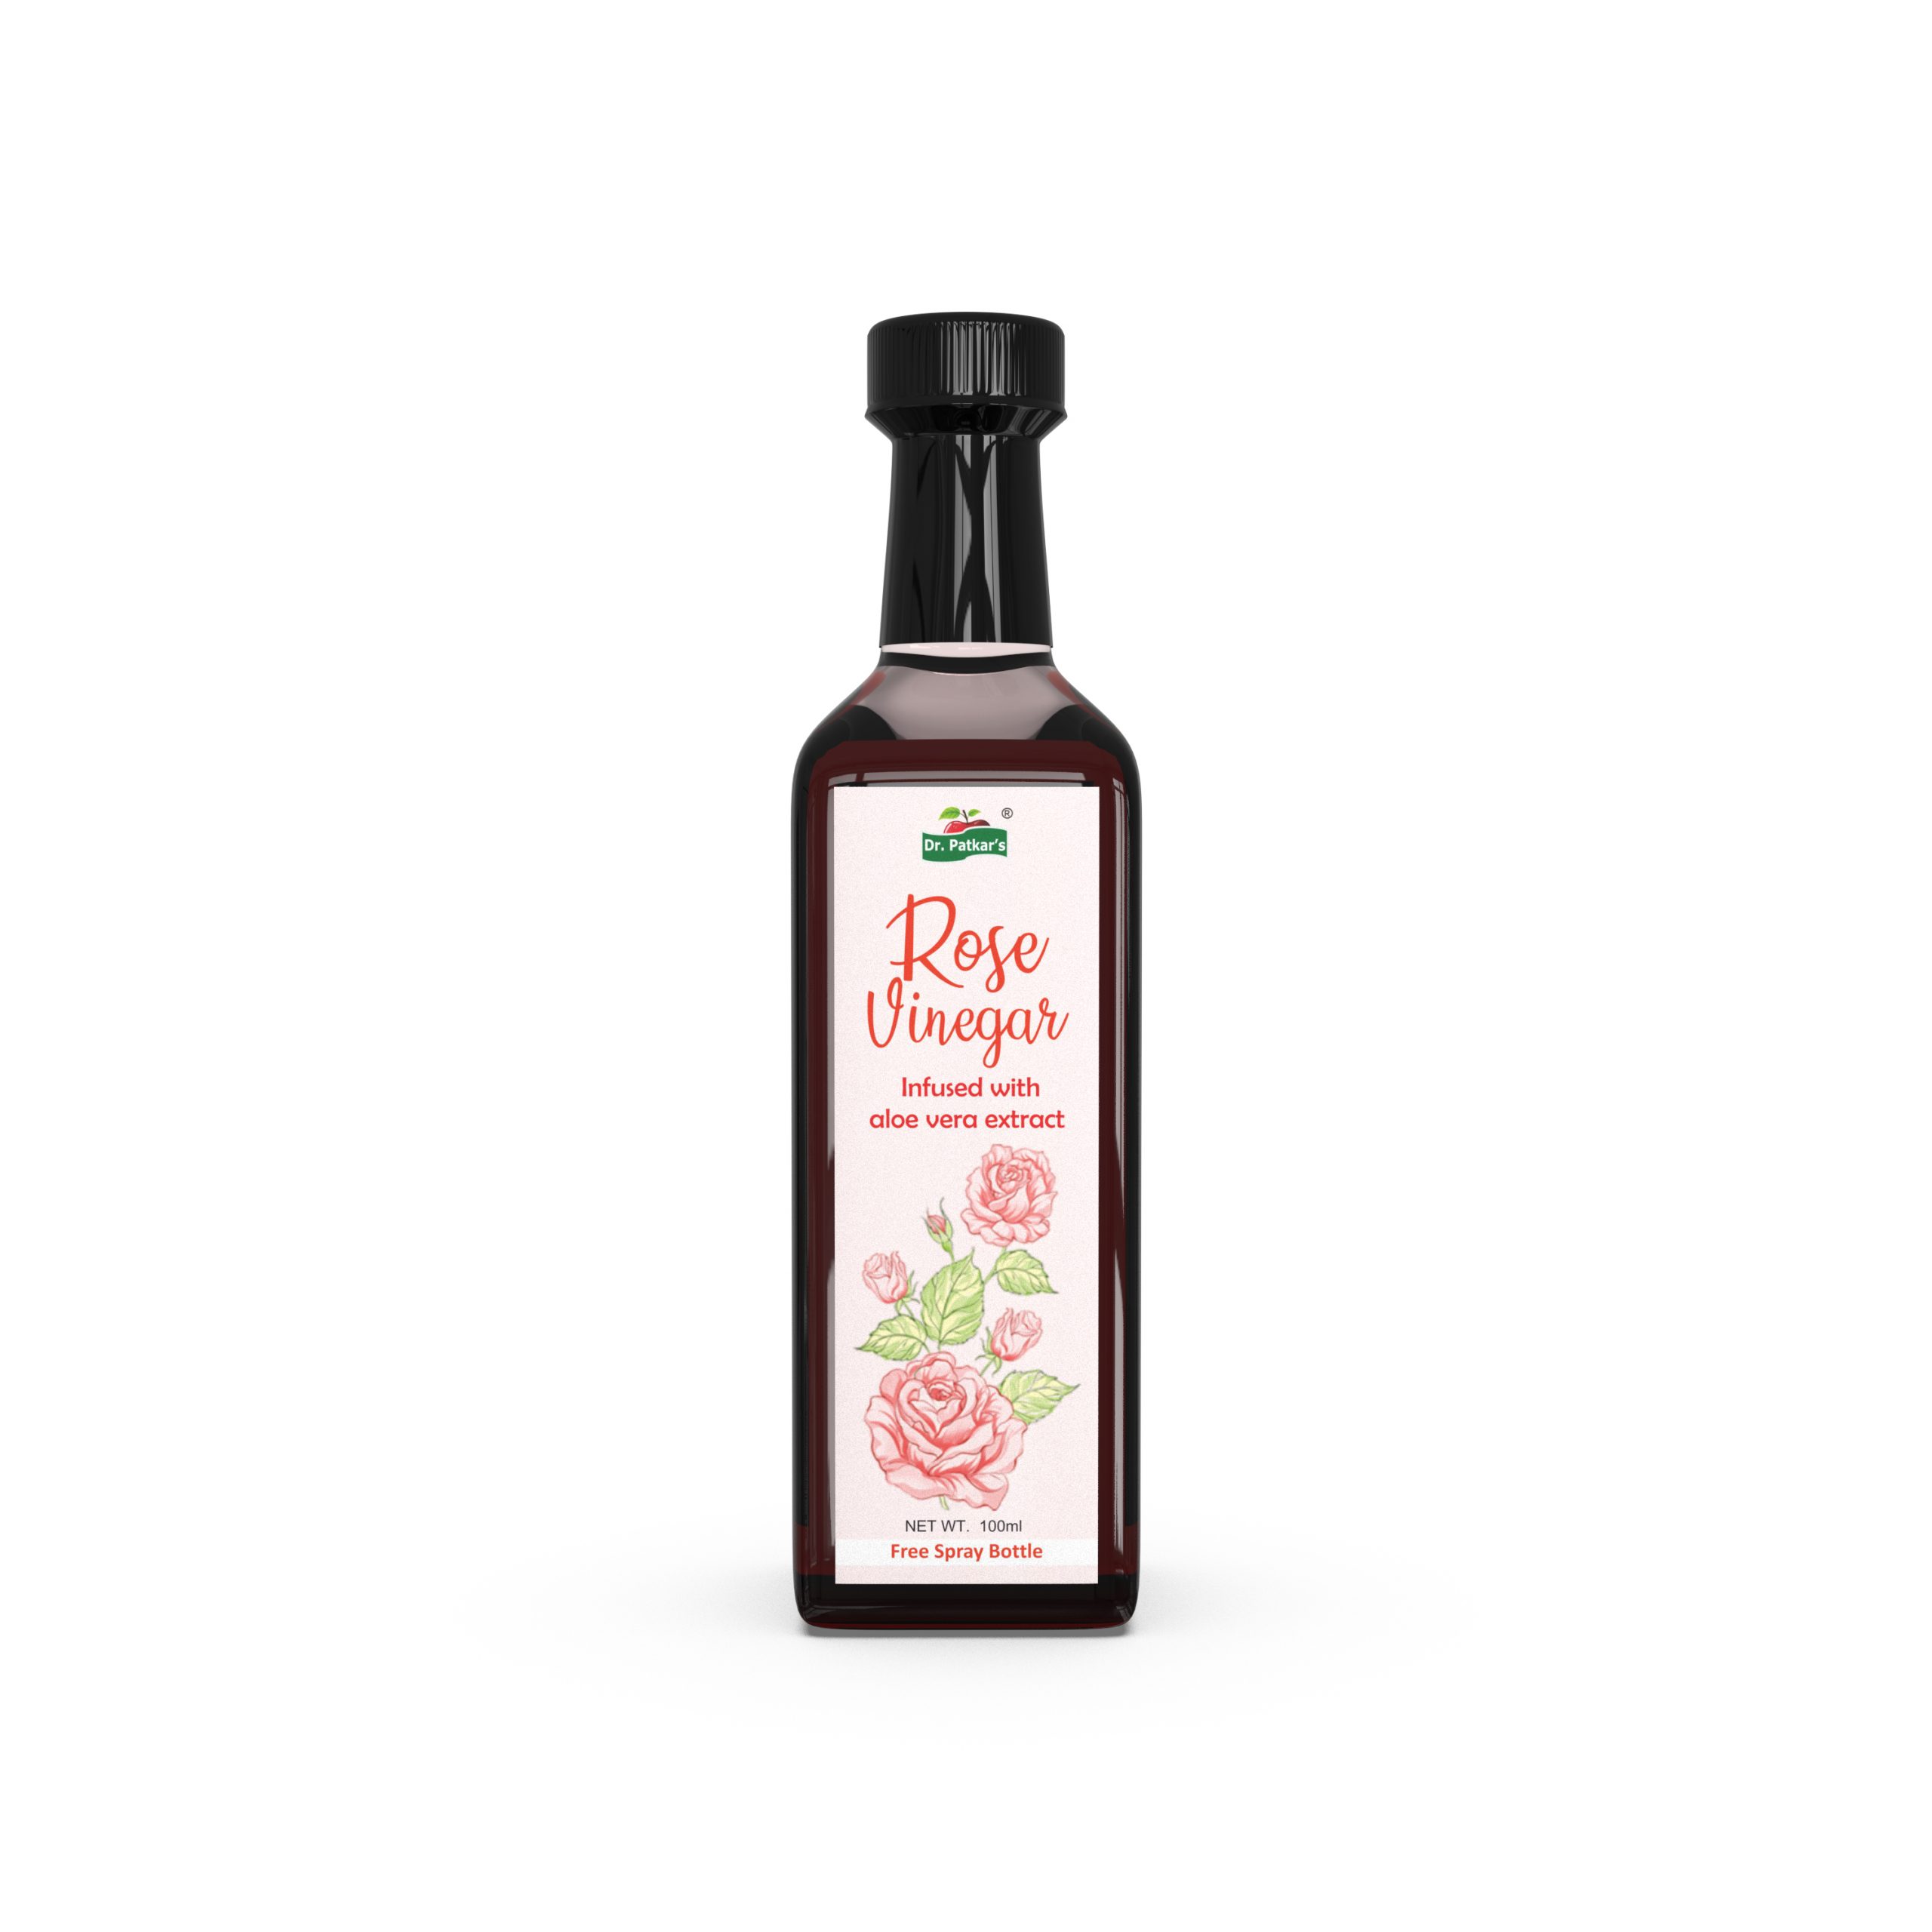 DR. PATKAR'S ROSE VINEGAR INFUSED WITH ALOE VERA EXTRACT 100 ML